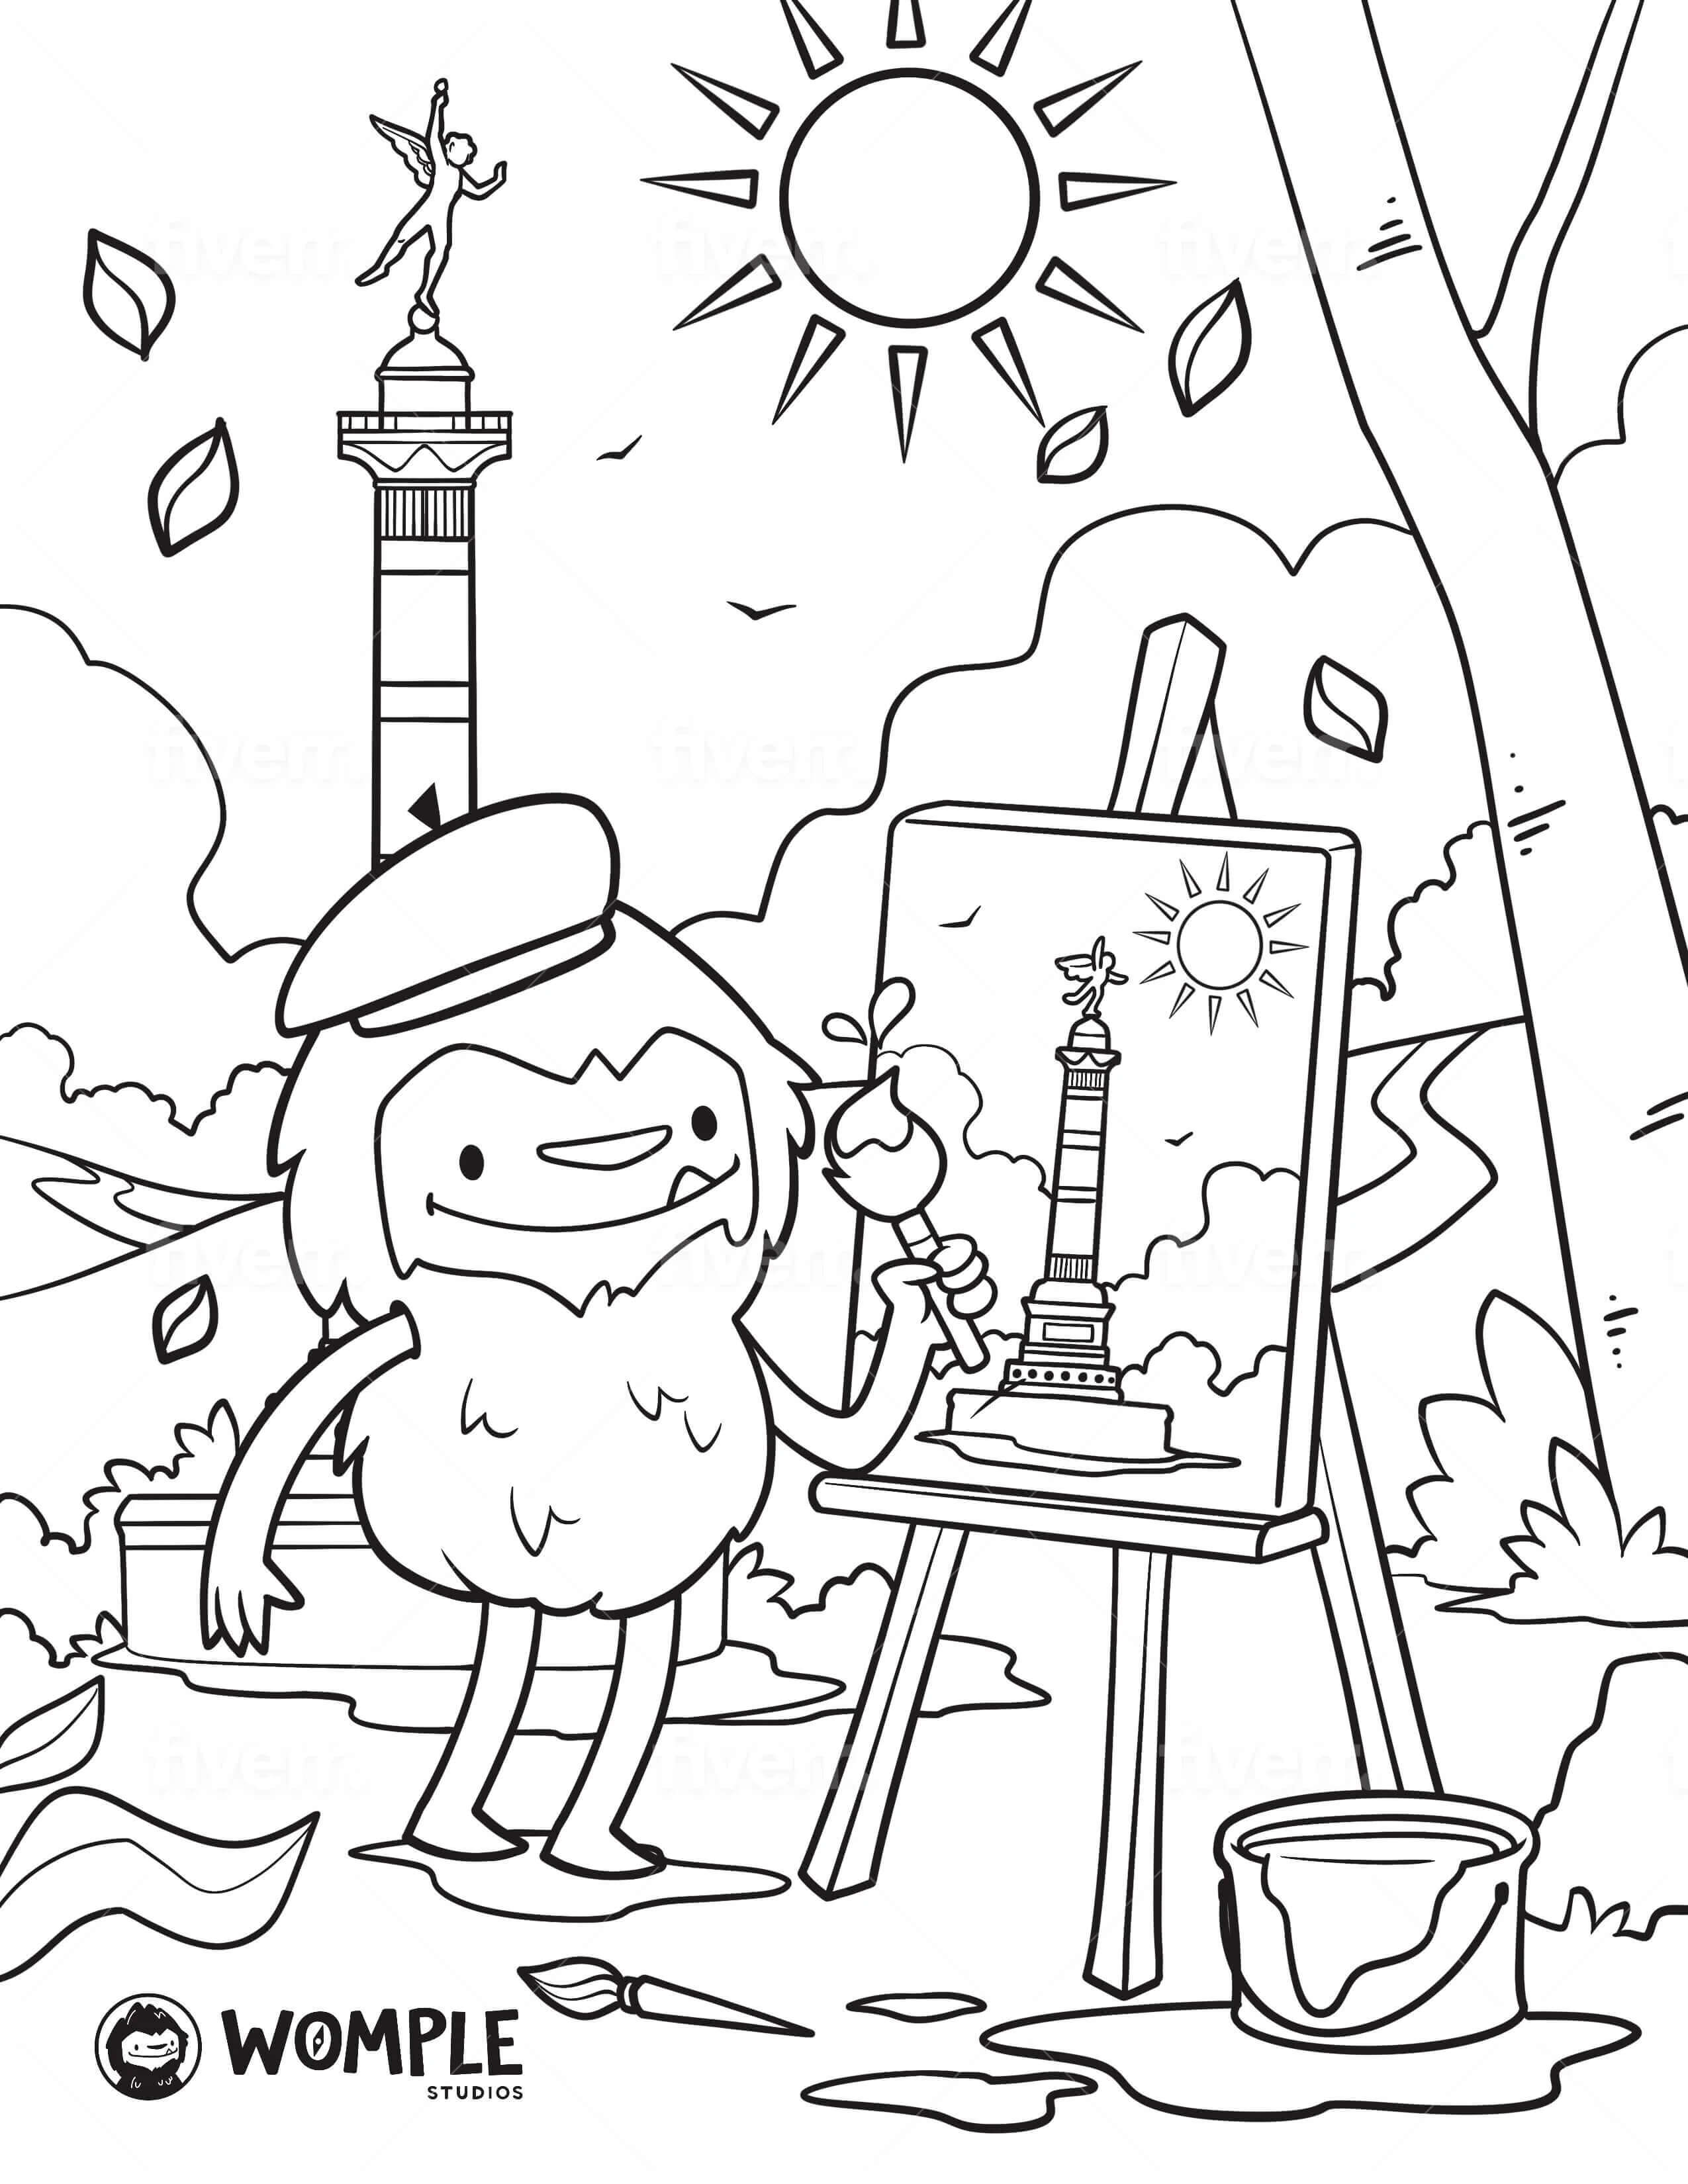 Womple painting Bastille tower Coloring Page